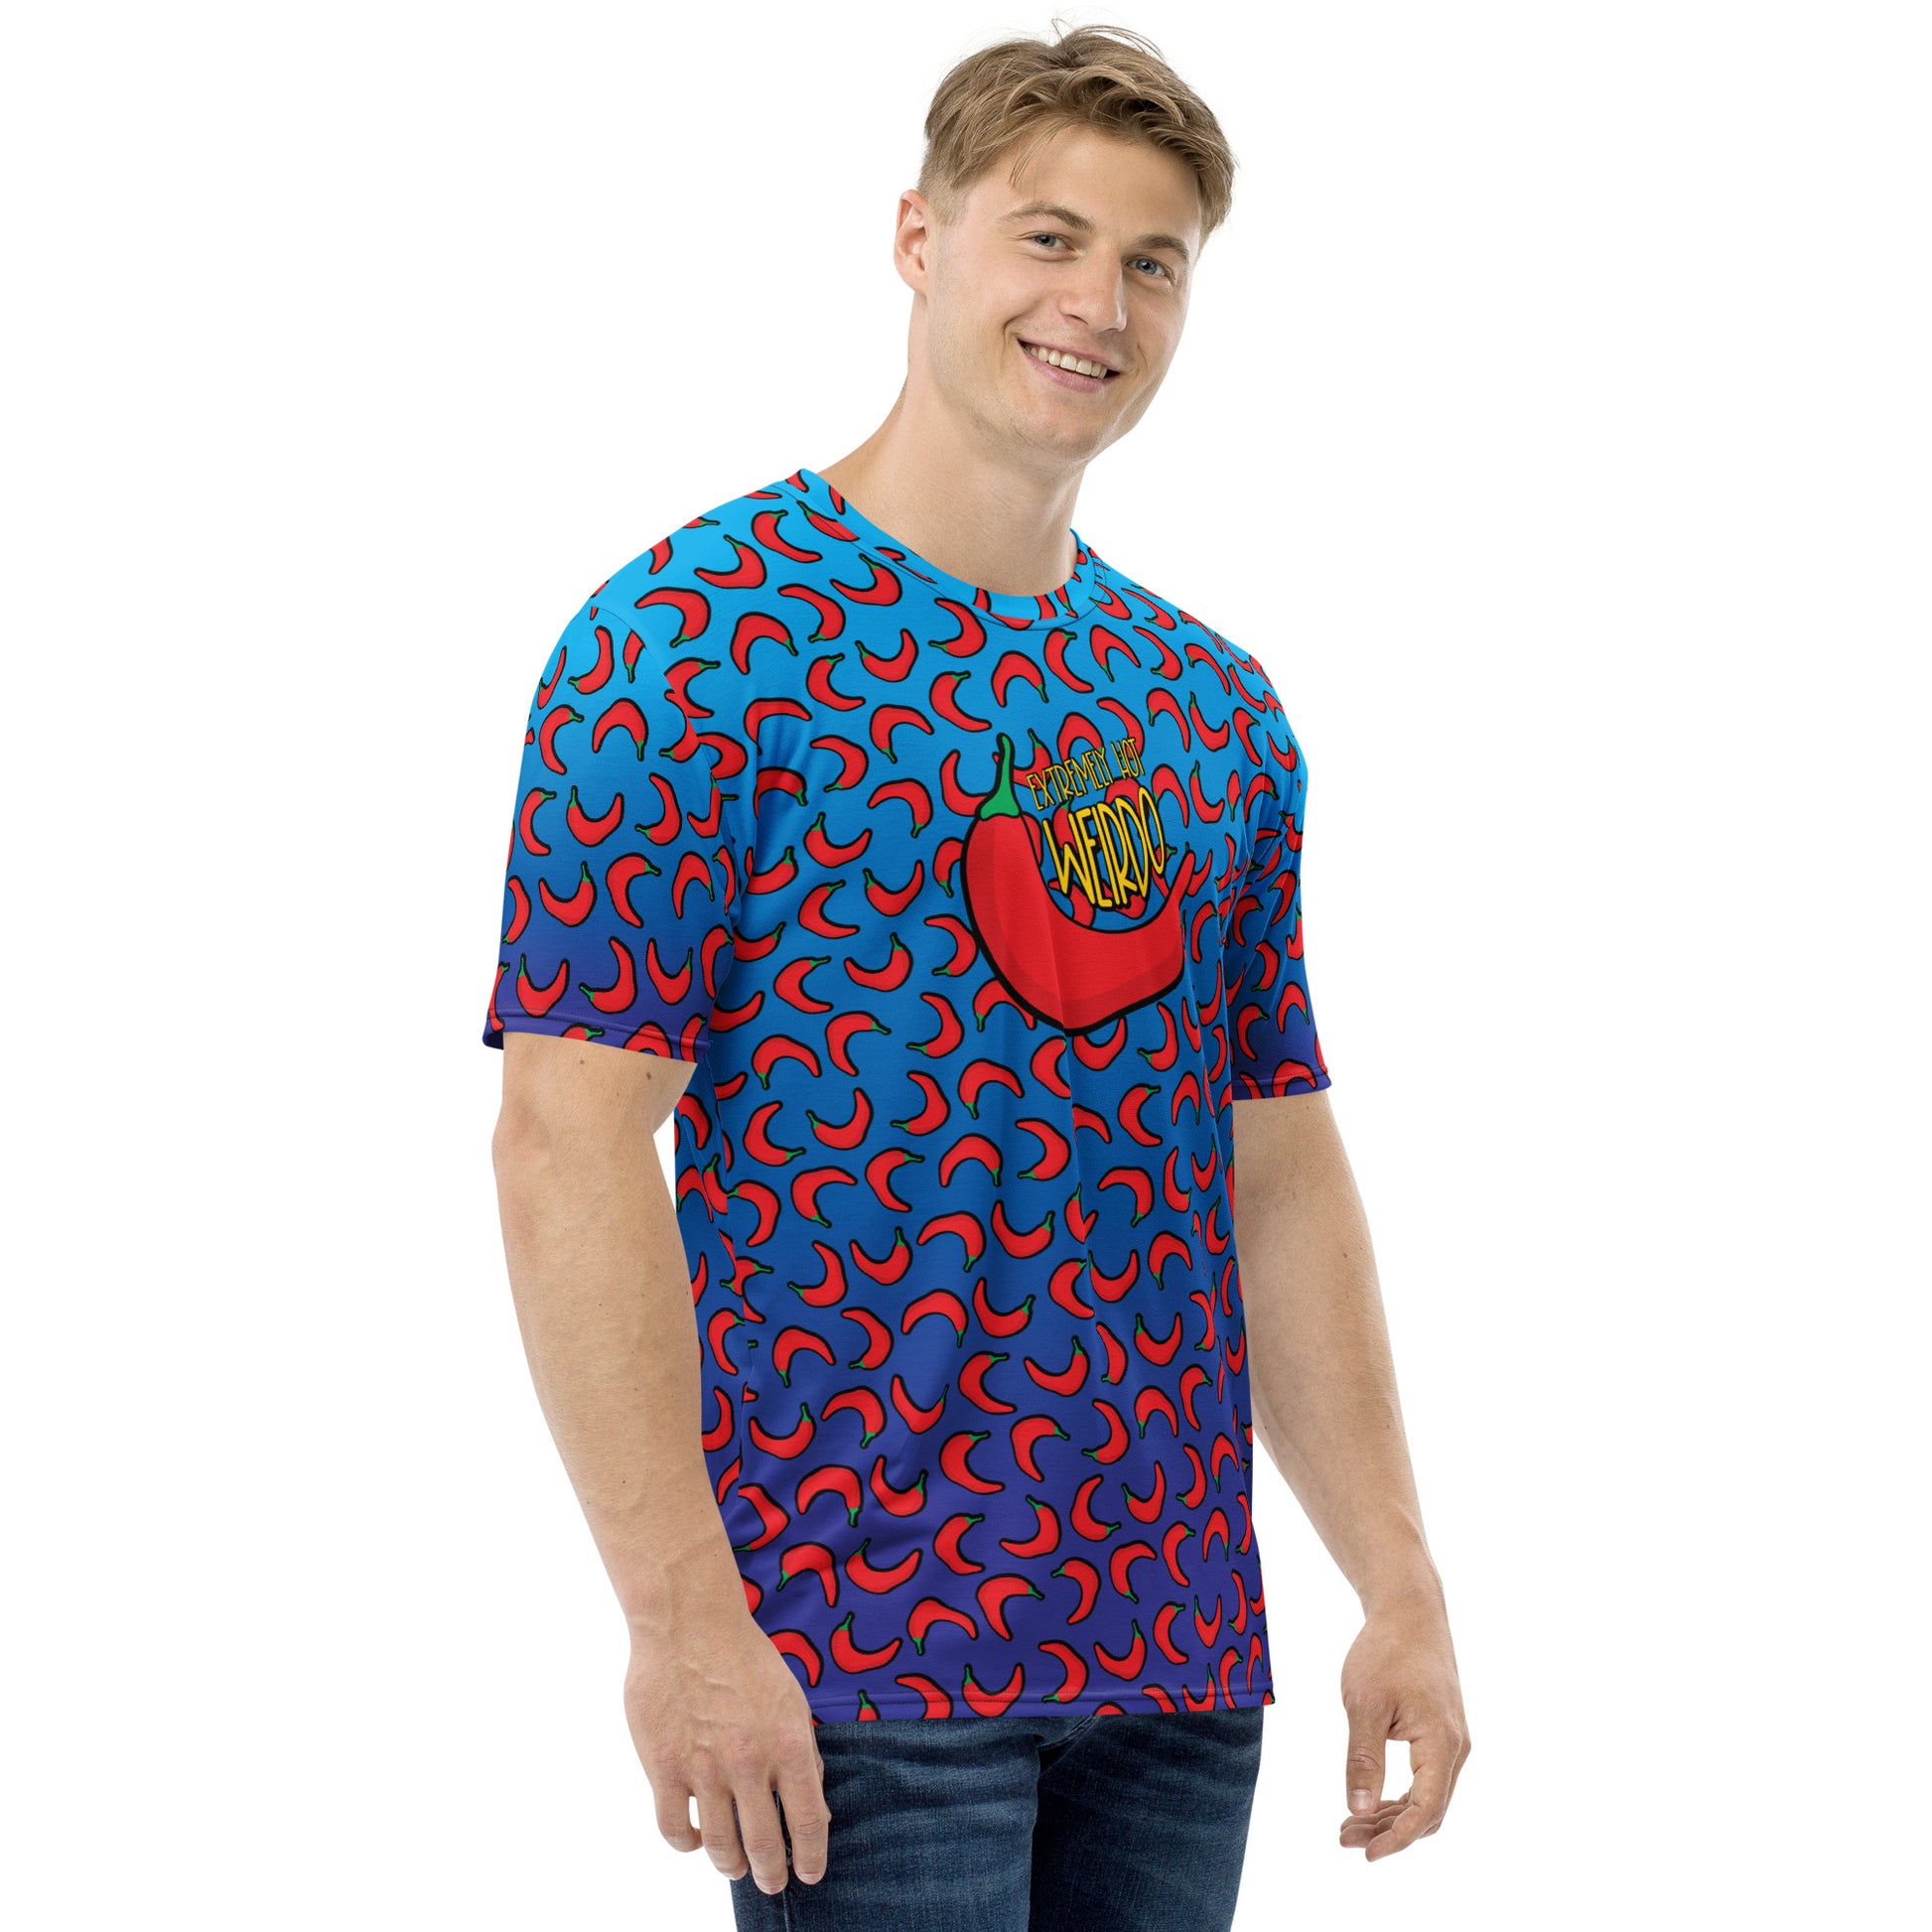 #WEIRDO | Weird t-shirt designs at this funny t shirt company! This men’s t shirt is light and dark blue and has contrasting red peppers printed all over the t shirt. Our Extremely Hot Weirdo funny meme is printed at the back of the t shirt.